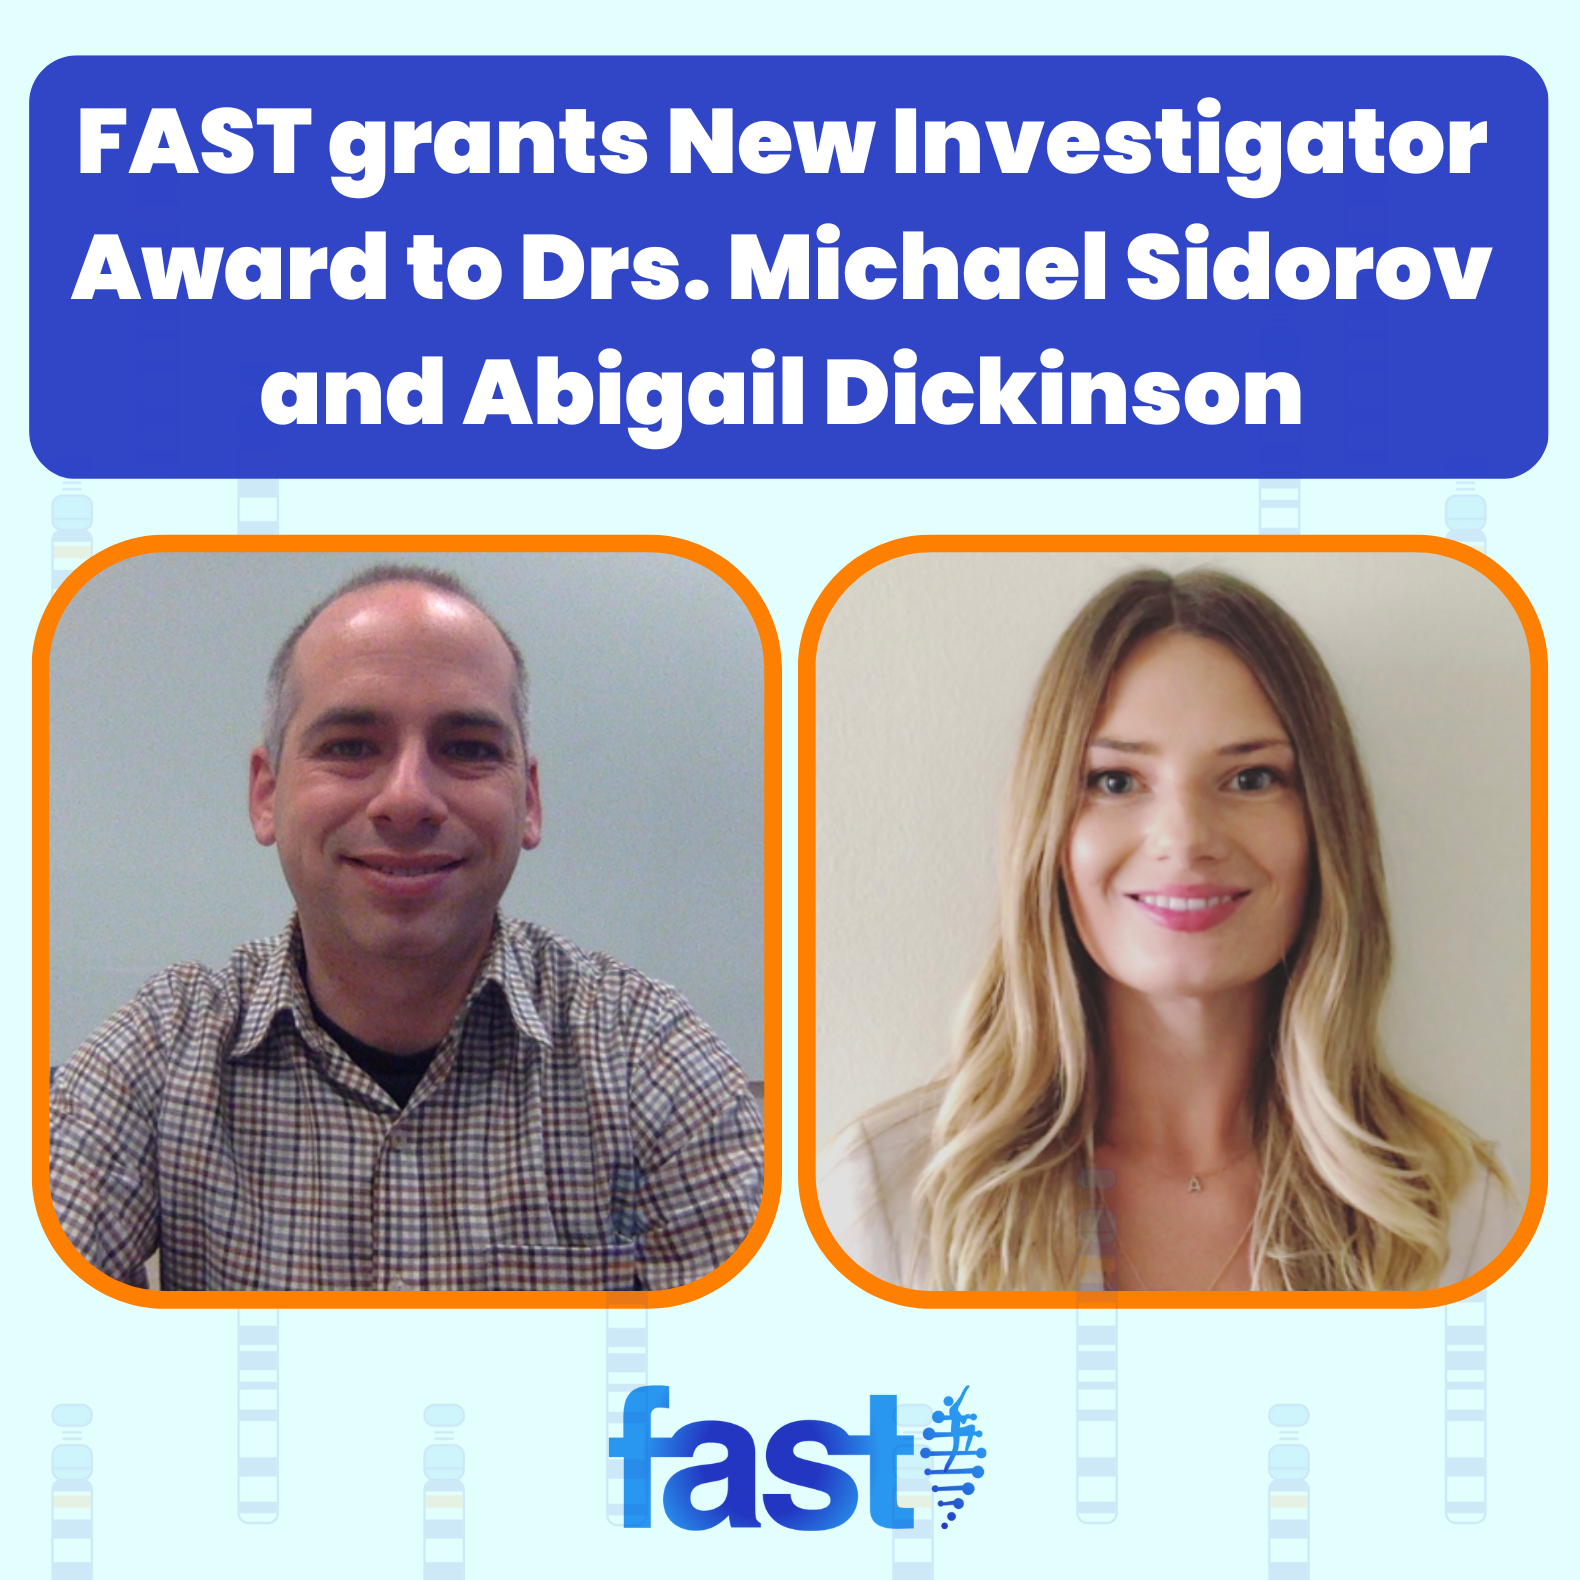 Research Update: FAST grants New Investigator Award to Drs. Michael Sidorov and Abigail Dickinson